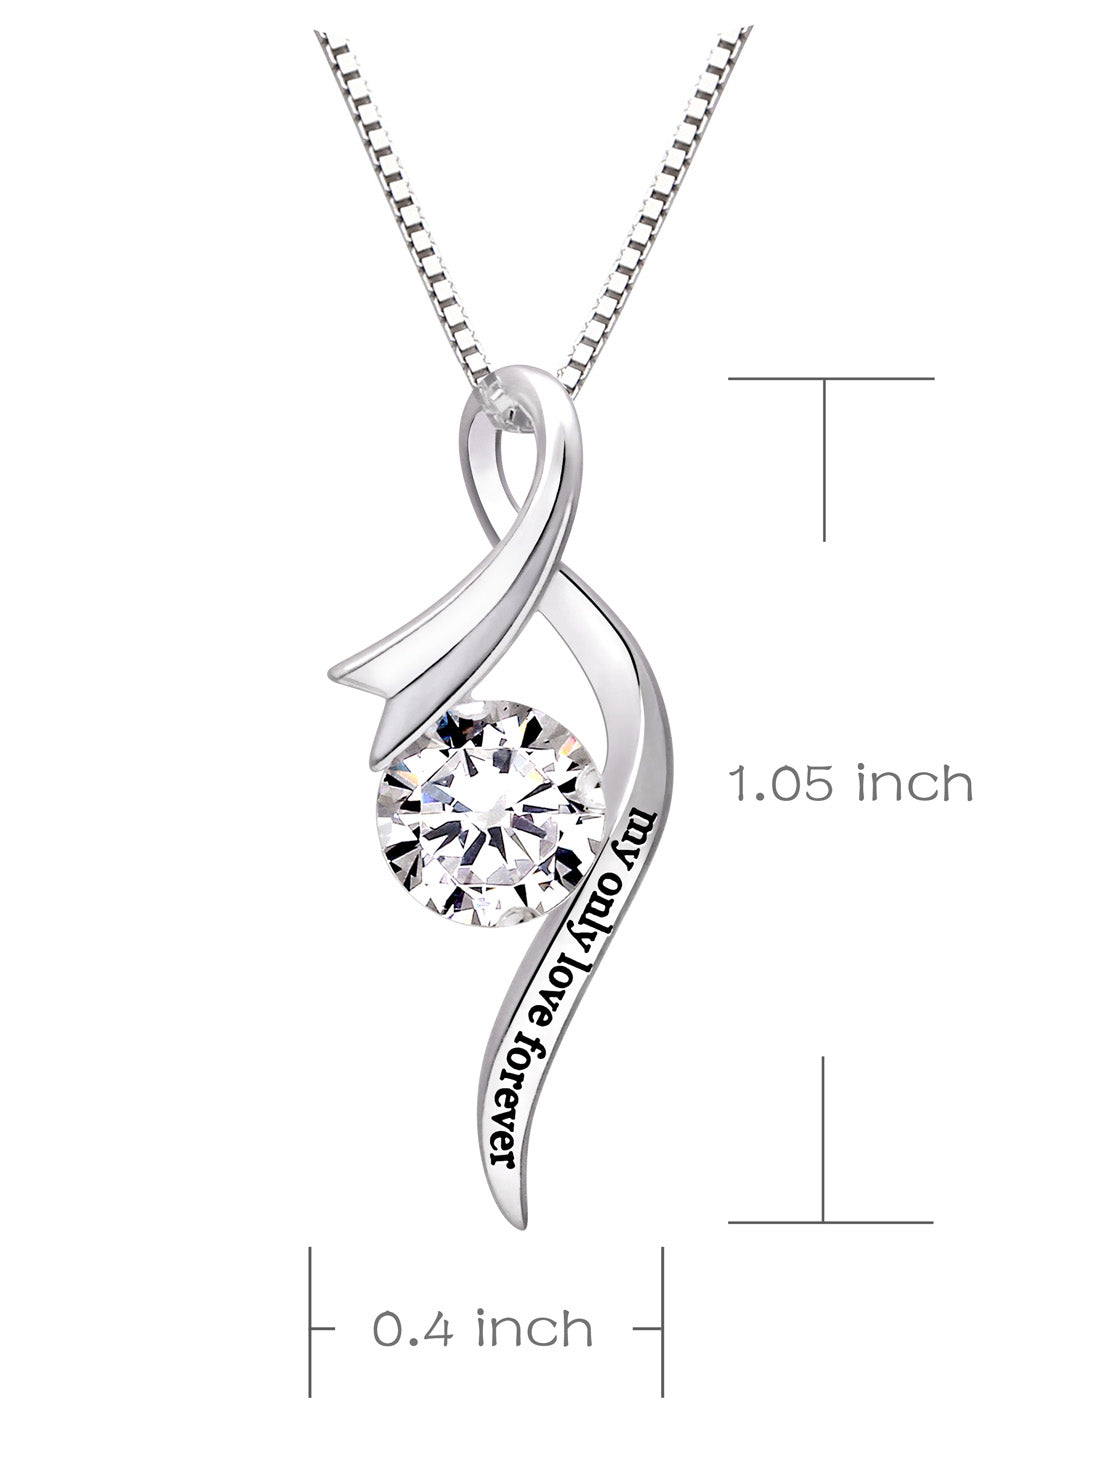 ALOV Jewelry Sterling Silver "my only love forever" Cubic Zirconia Pendant Necklace